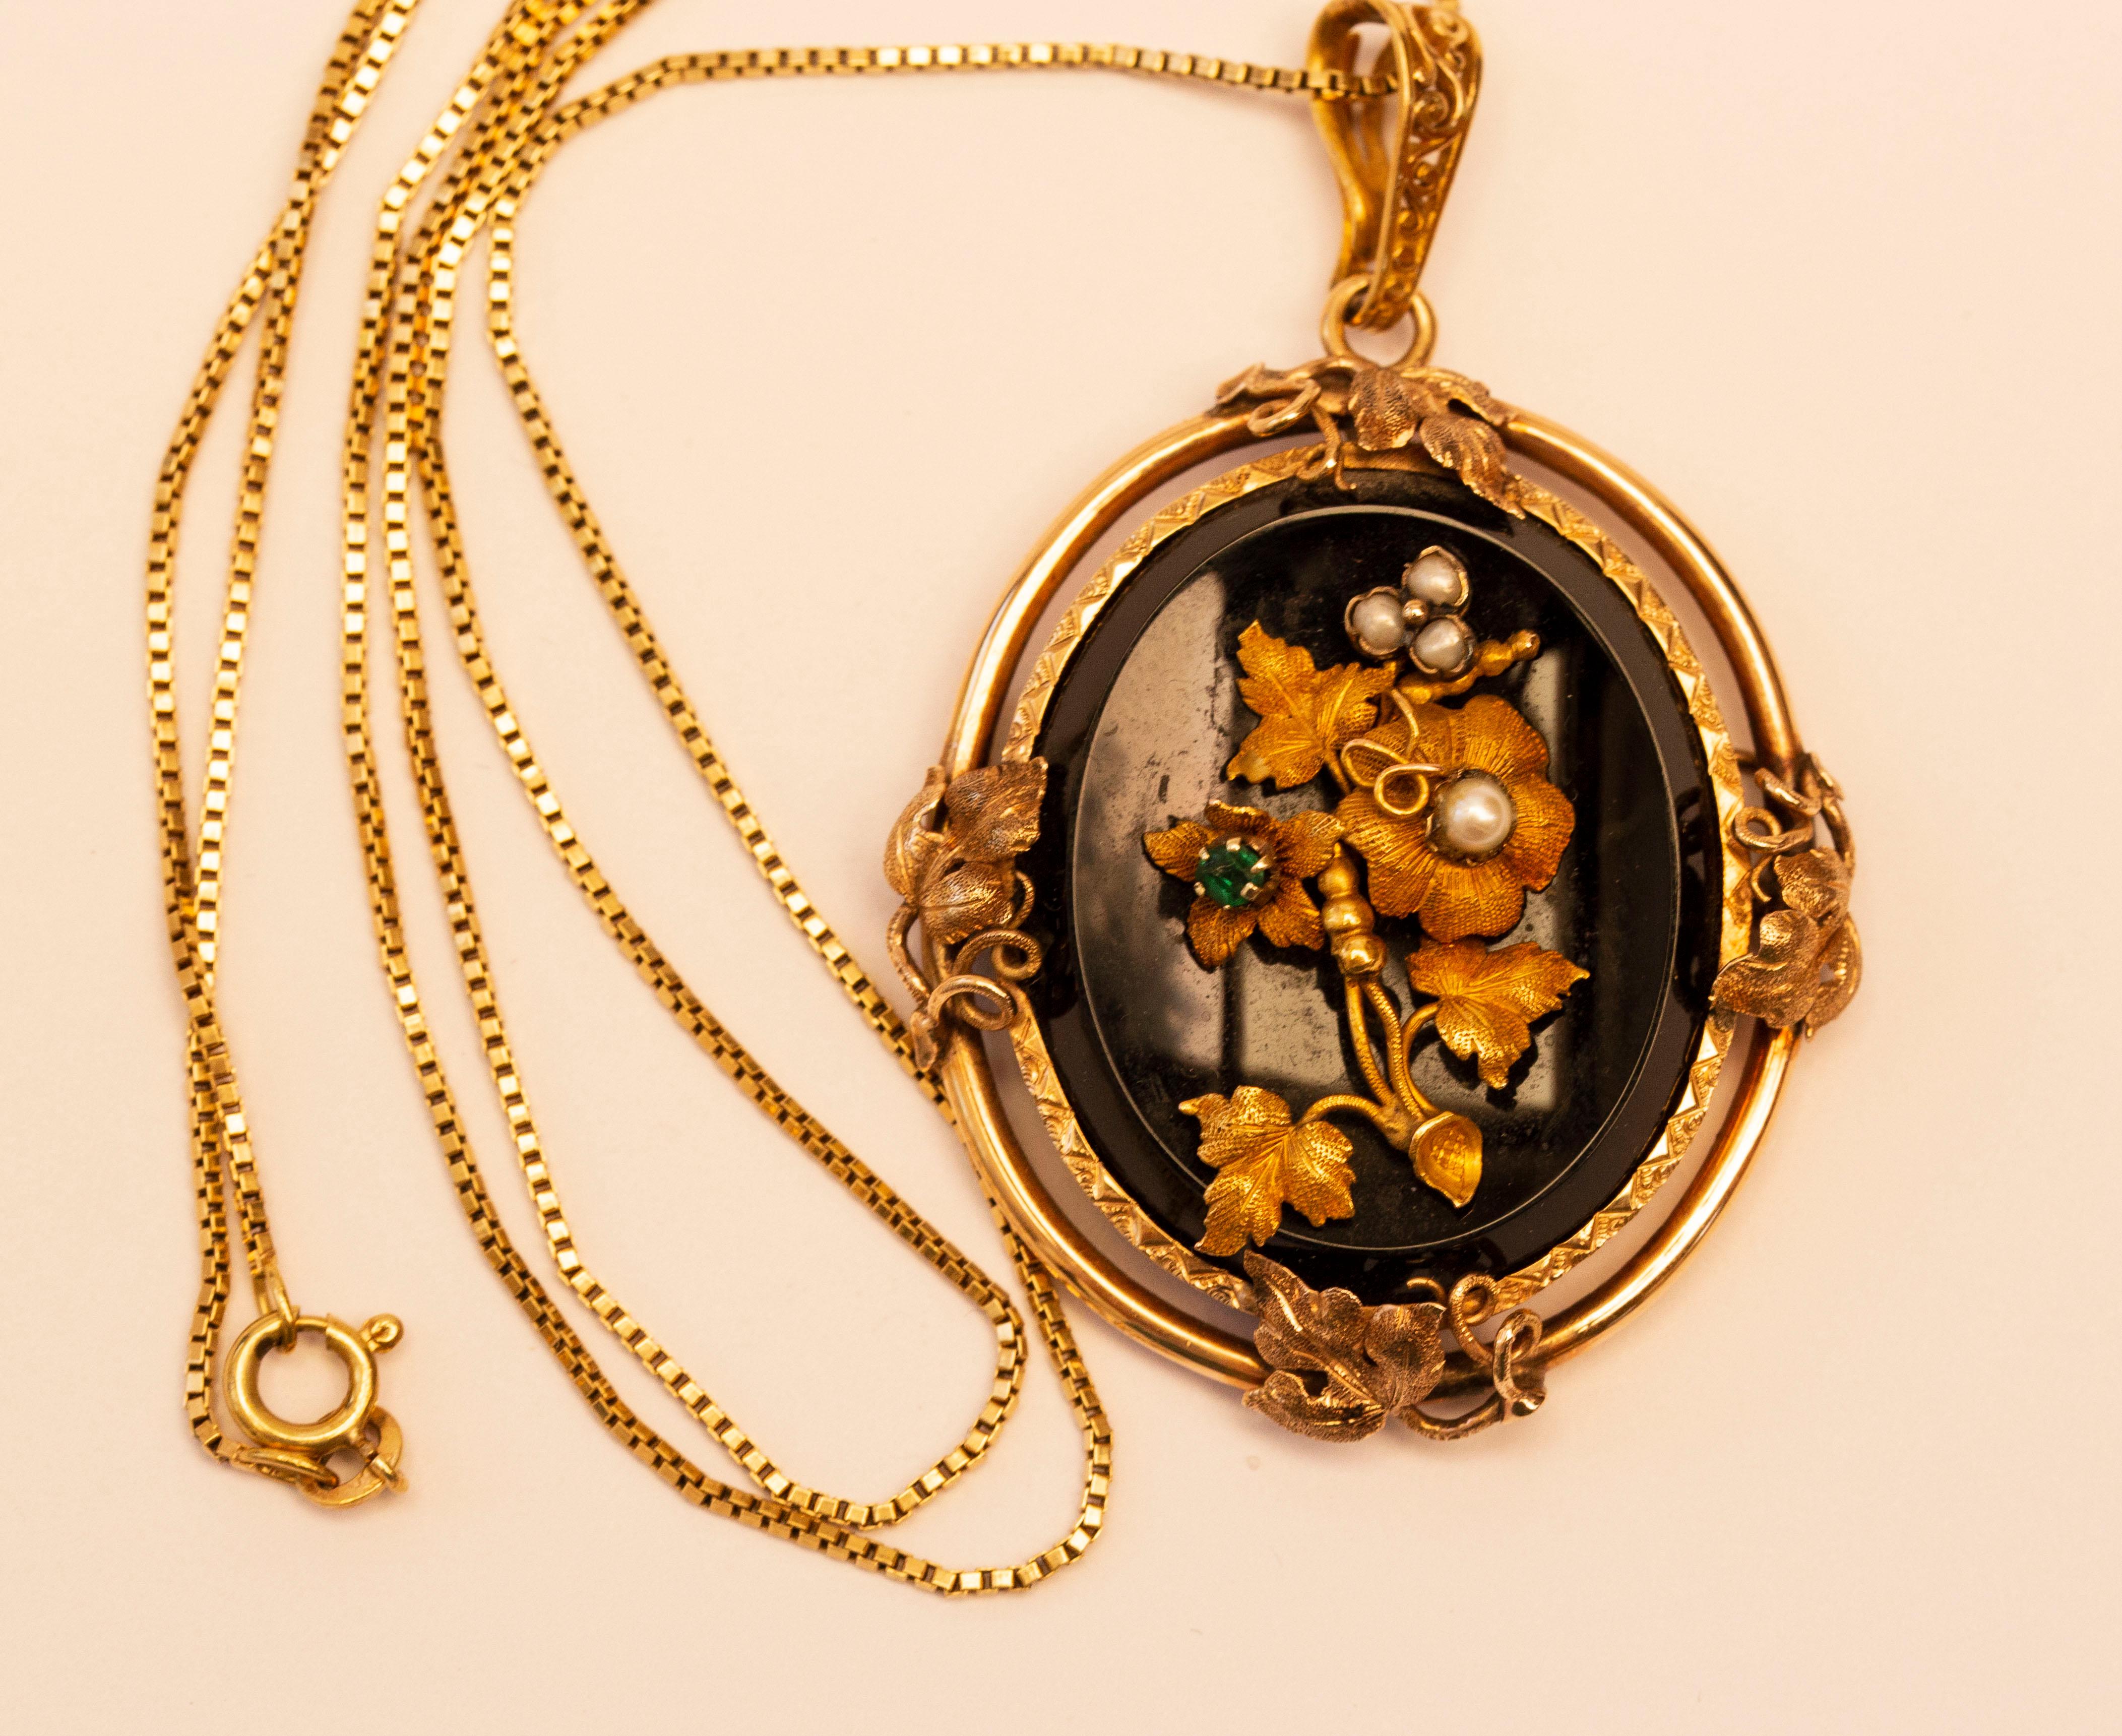 A Victorian antique 14 karat oval onyx pendant with a floral decoration assembled of pearls, emerald, and engraved gold leaves with petals. In the past the pendant was also used a brooch, but the pin to attach it is missing now ( please see the